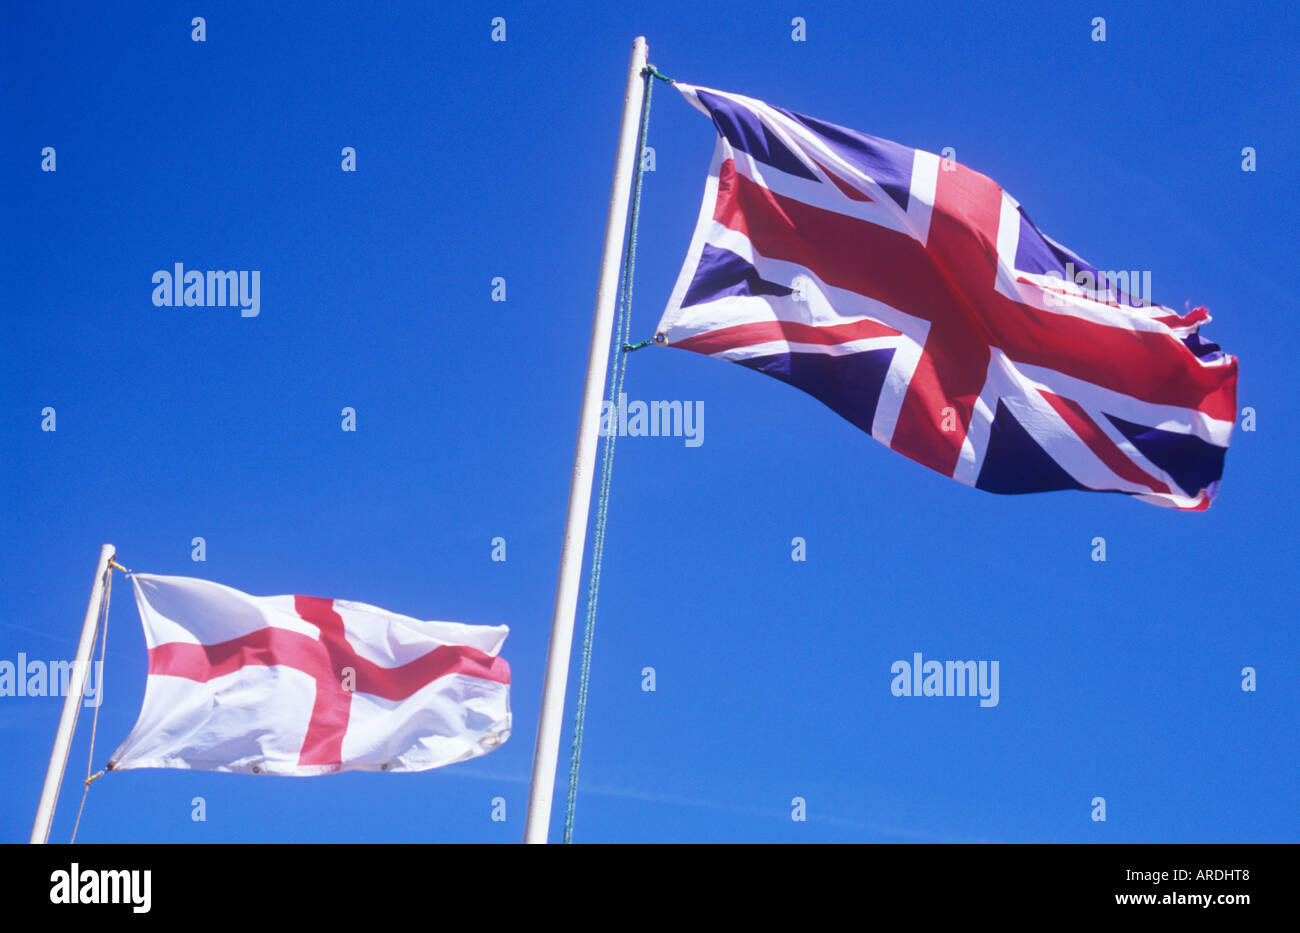 St George flag or English Ensign fluttering from flagpole against clear blue sky with Union Jack on separate pole Stock Photo